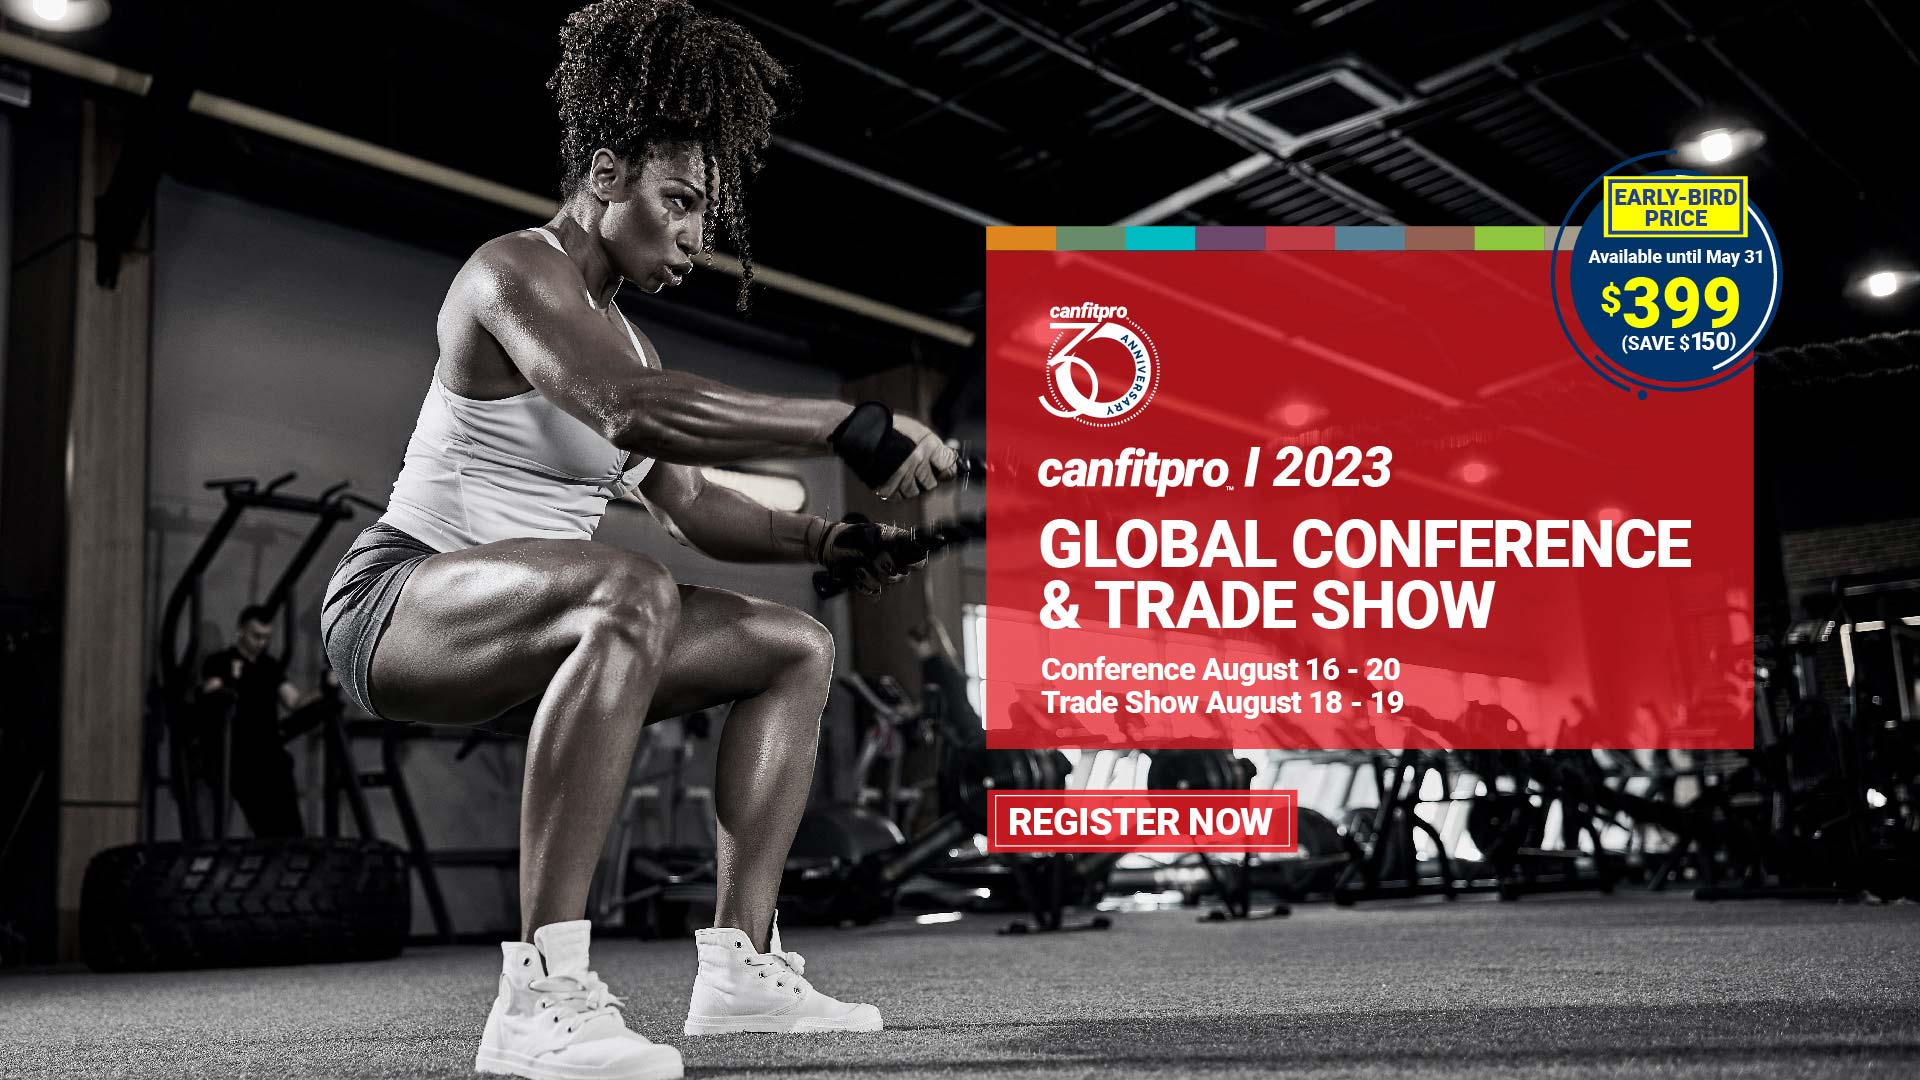 Canfitpro Global Trade Show & Conference